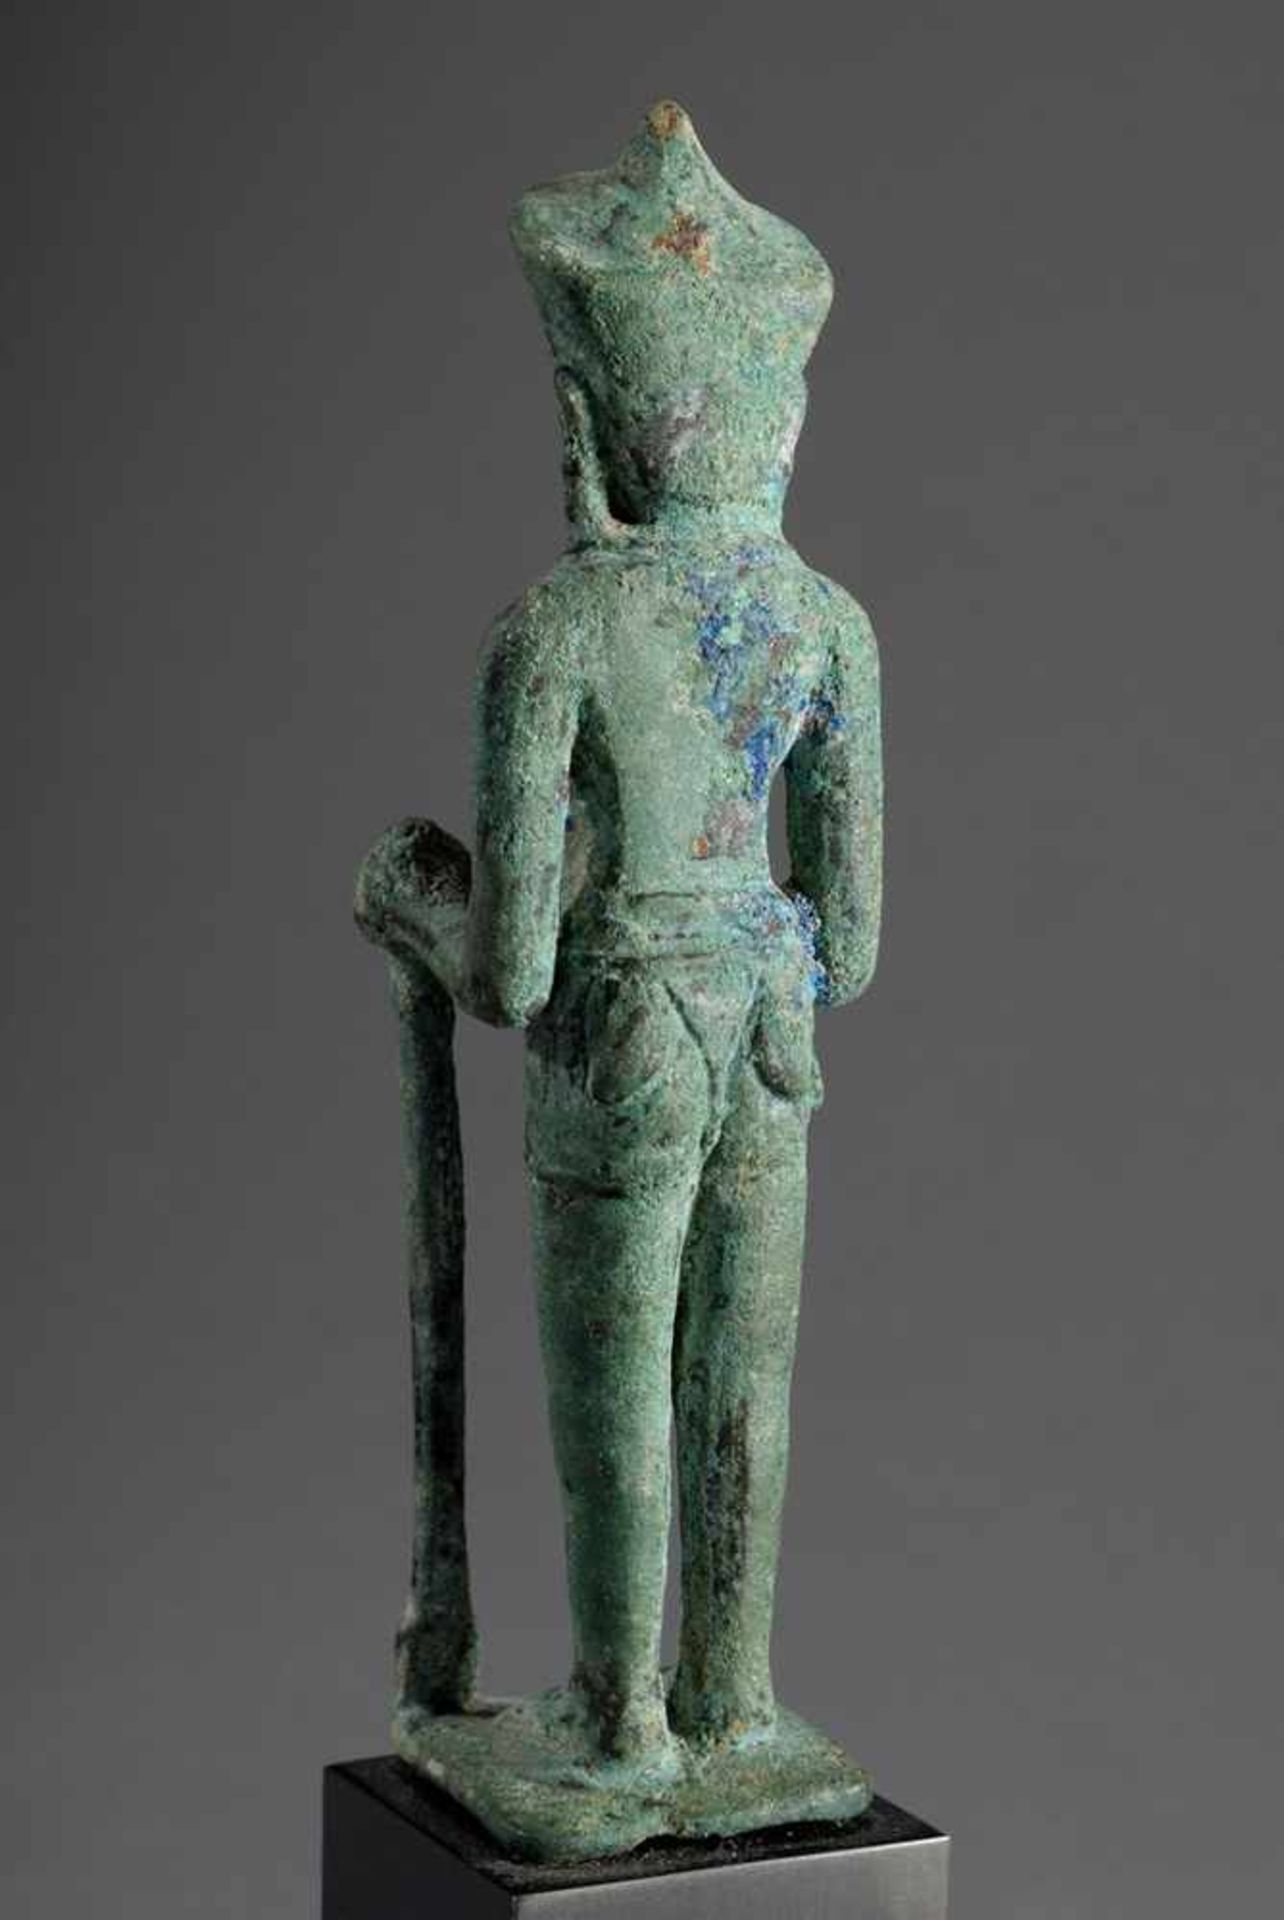 Standing Khmer bronze figure "Godness" holding a chakra in her right hand, probably Shiva, Bayon - Image 3 of 4